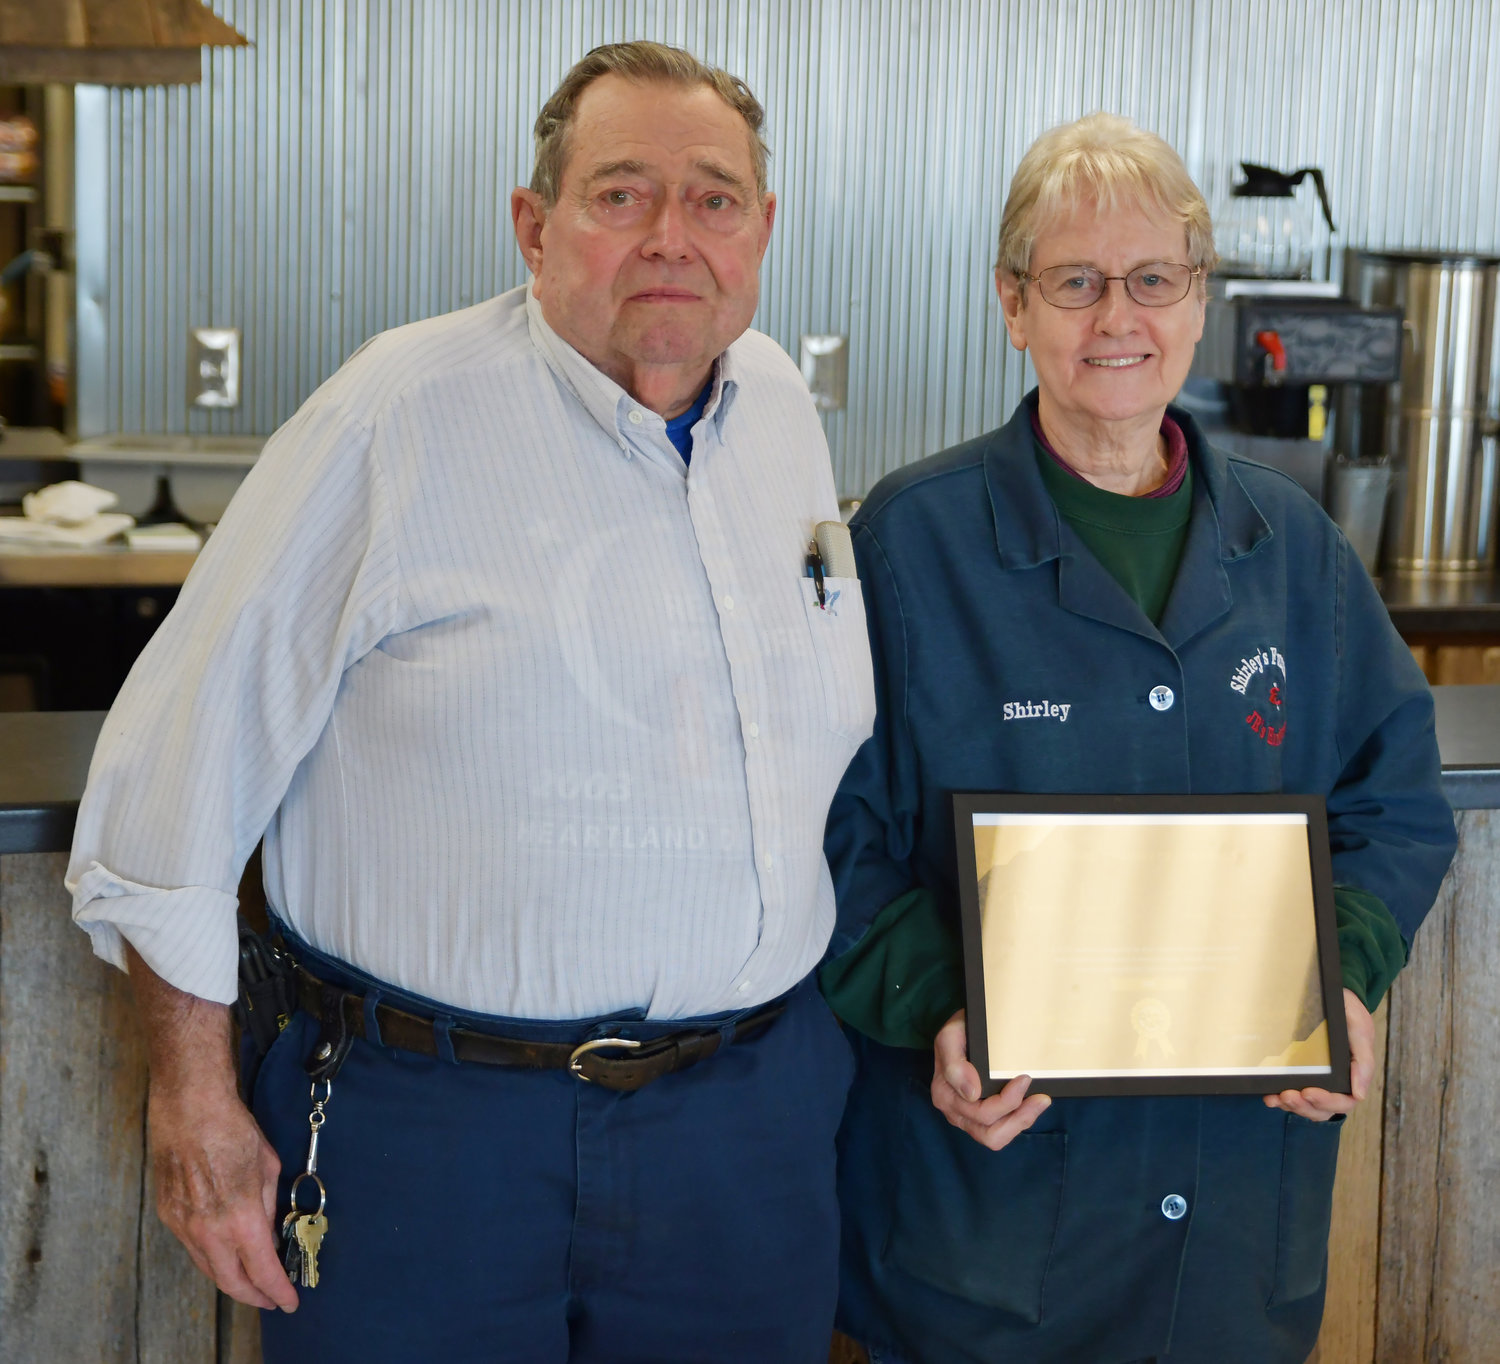 JR and Shirley Crum are pictured at The Market on Friday. The couple has been in business for 46 years and are the owners of Shirley’s Furniture and JR’s Hardware, which is located on Vienna historic courthouse square. Their business was nominated for the Pioneer Award.